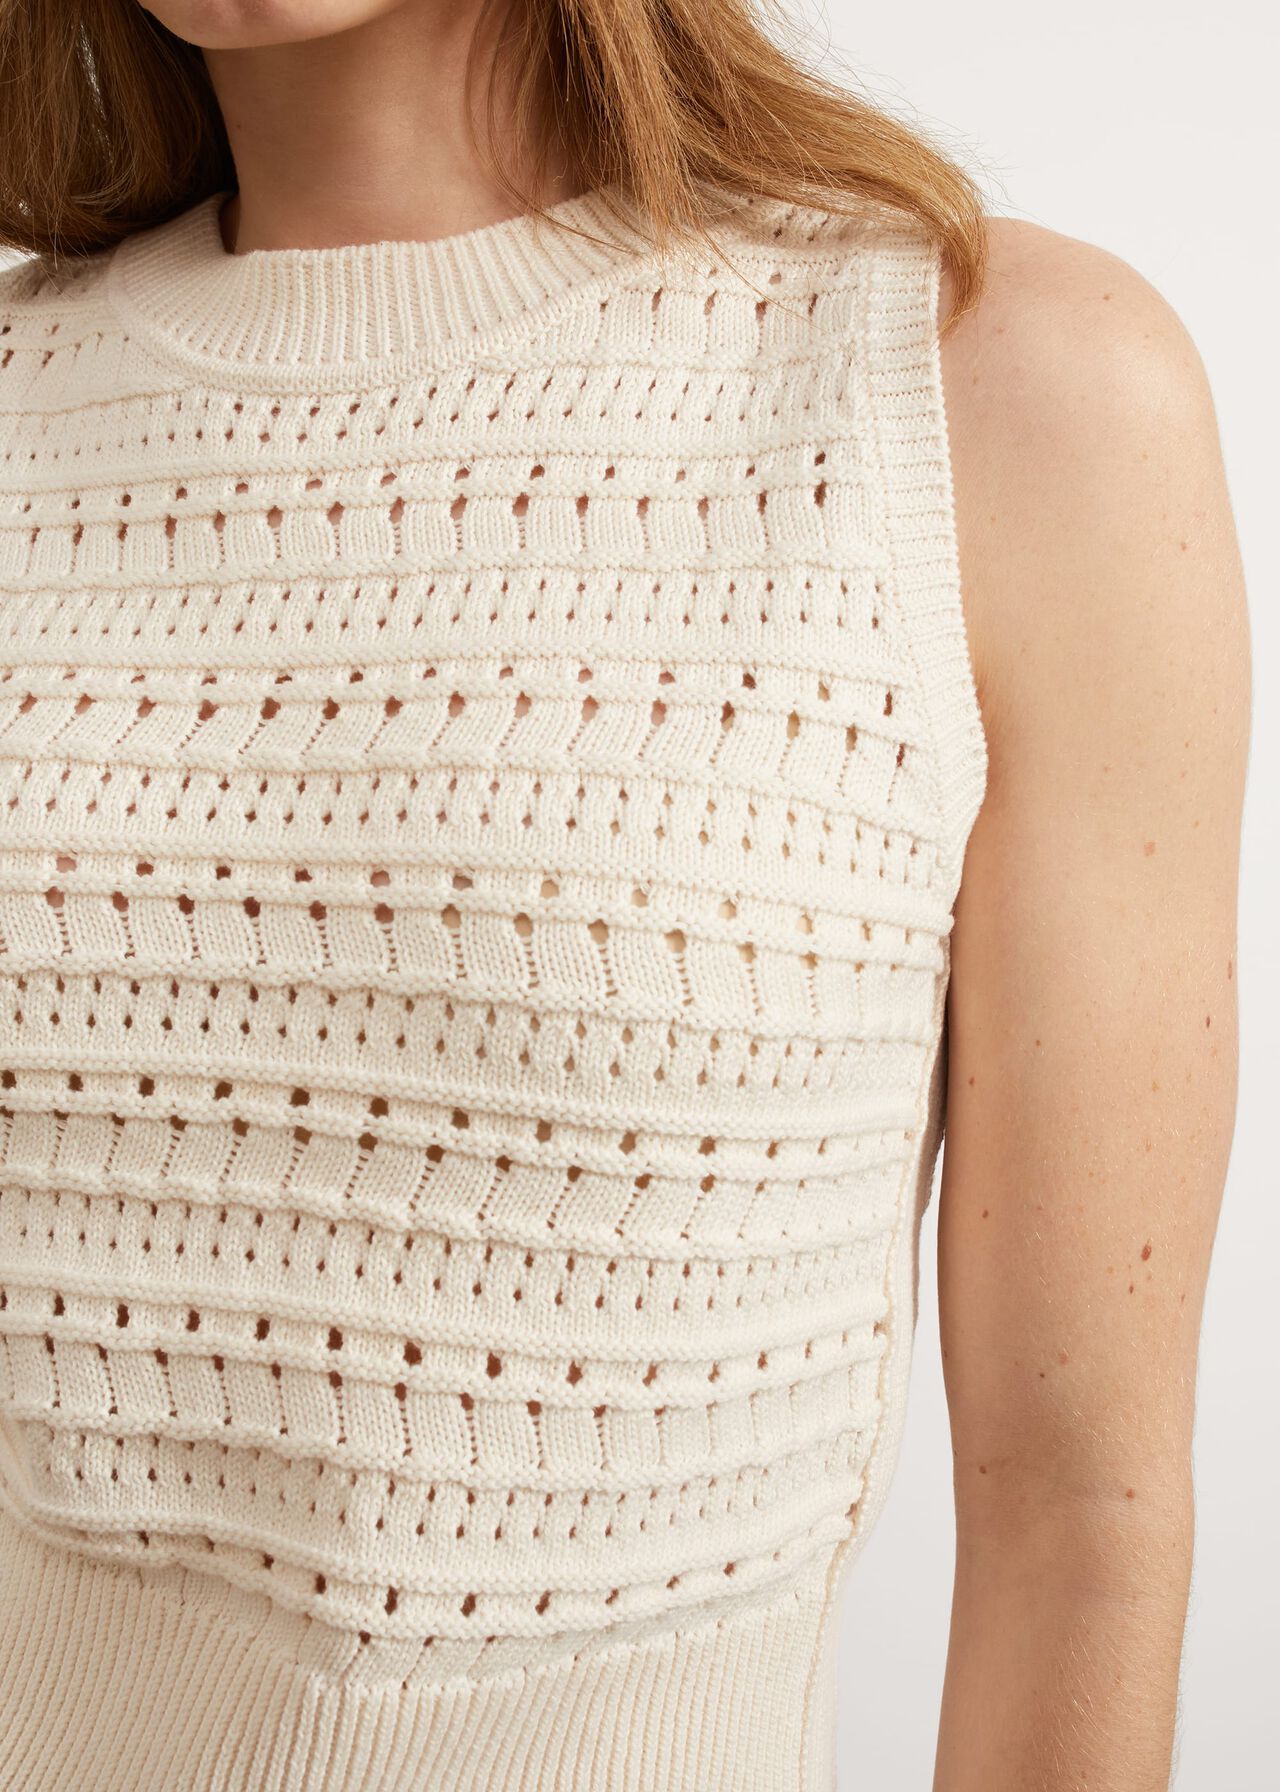 Colemere Cotton Knitted Vest, Buttercream, hi-res